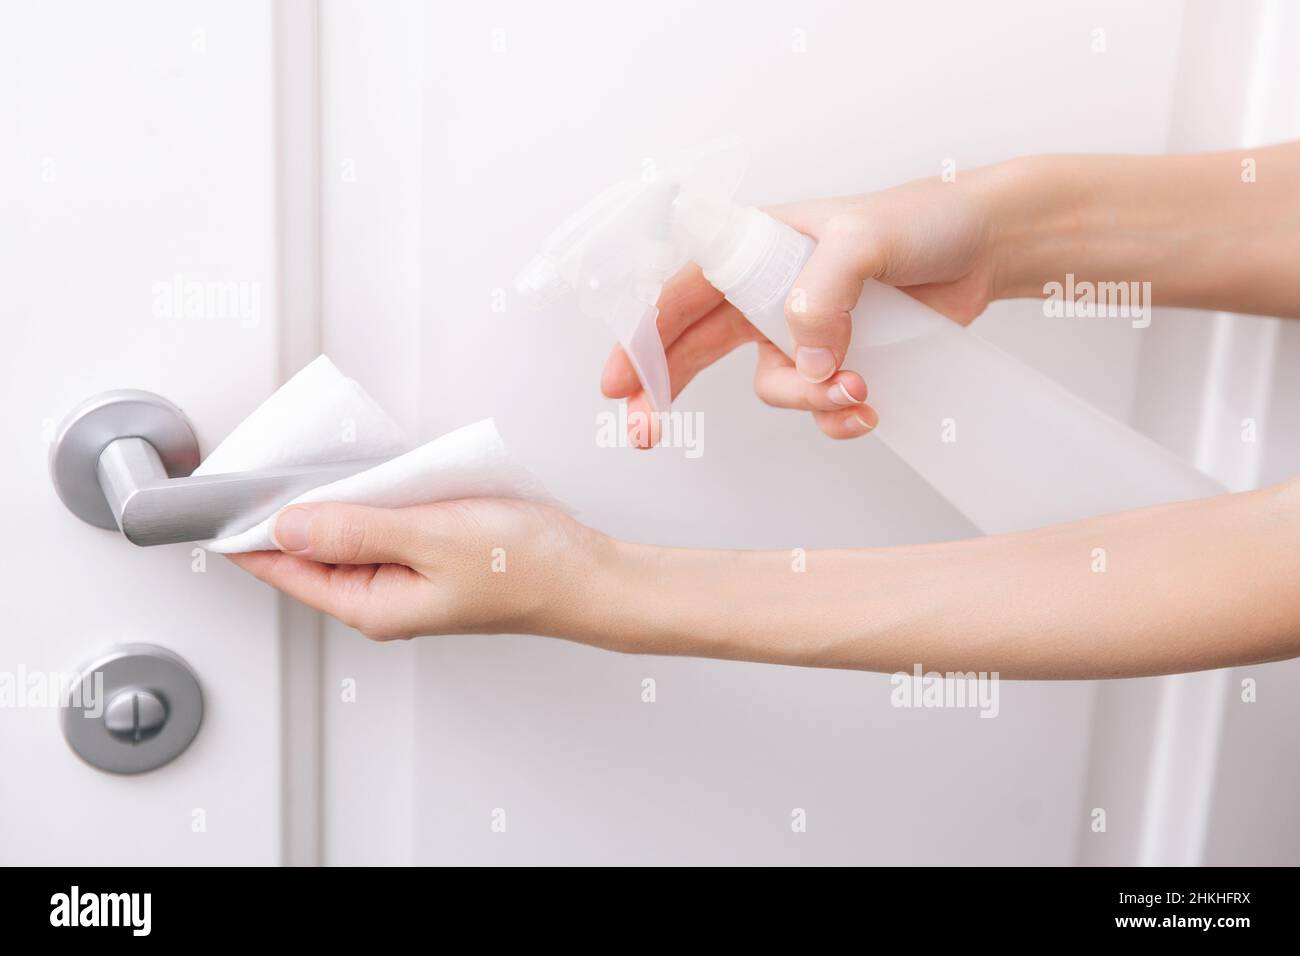 Cleaning white door handles with an antiseptic wet wipe and sanitizer spray. Disinfection in hospital and public spaces against corona virus. Woman Stock Photo